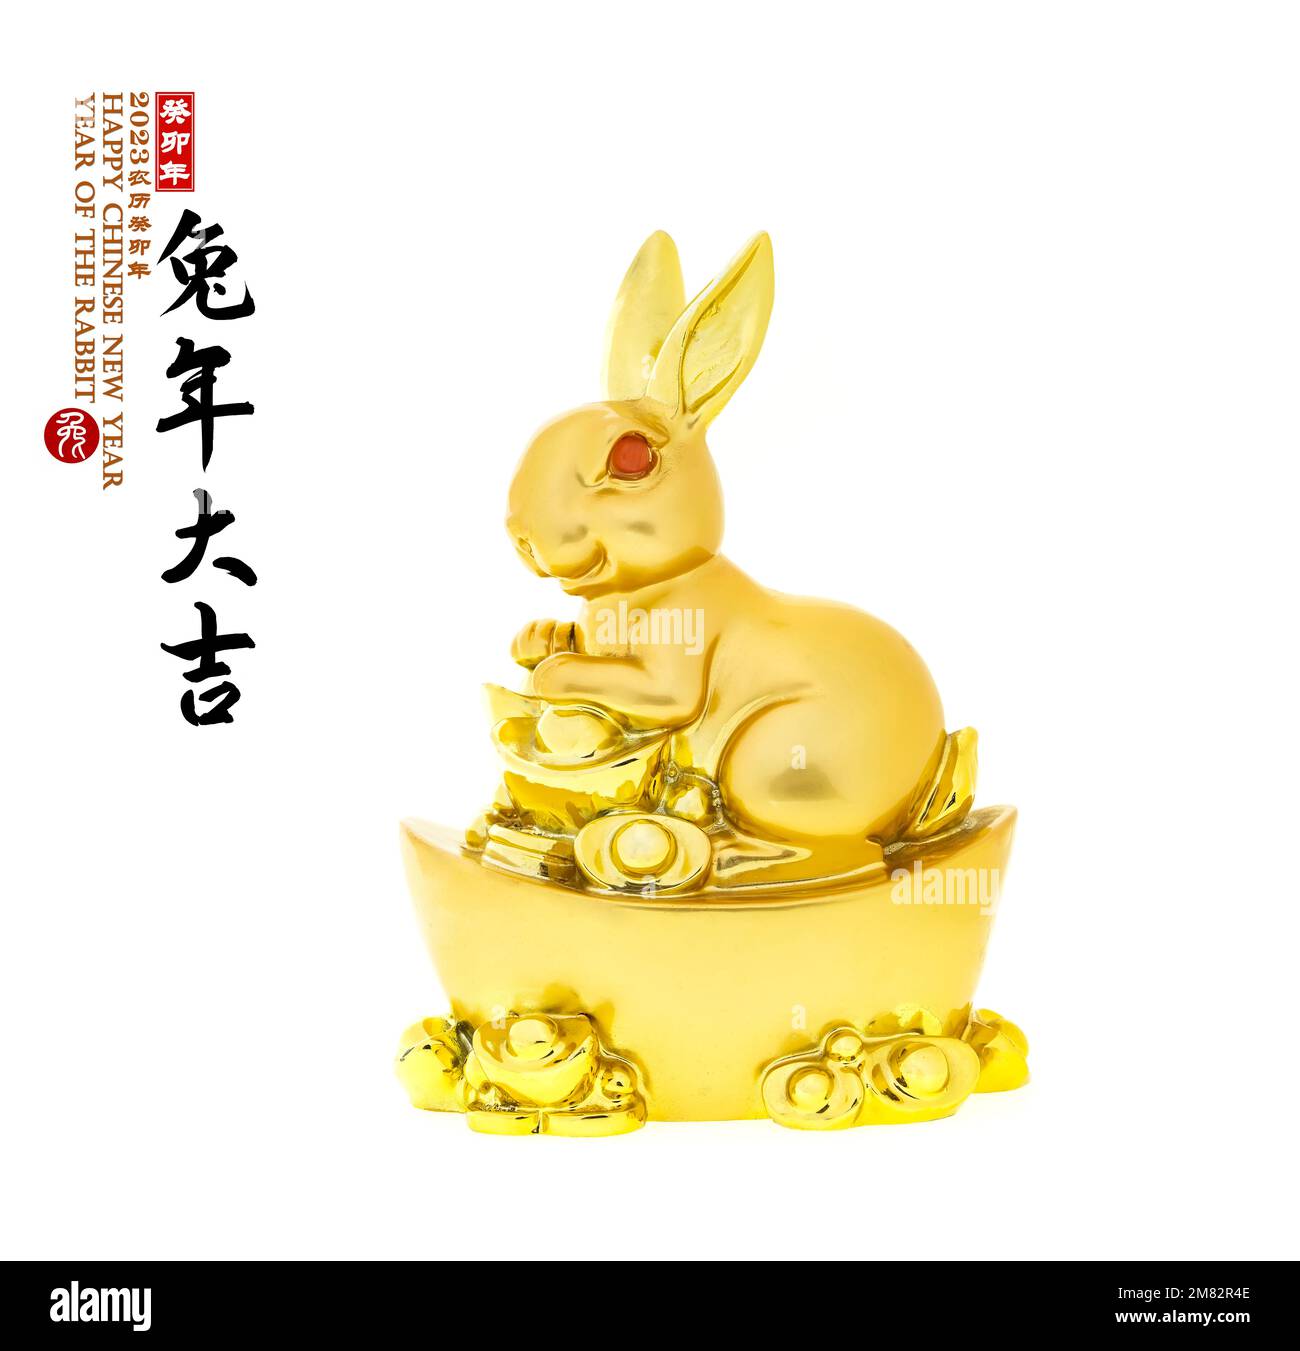 Tradition Chinese golden rabbit statue,,Chinese characters translation: "good luck for year of the rabbit".leftside word and seal mean:Chinese calenda Stock Photo